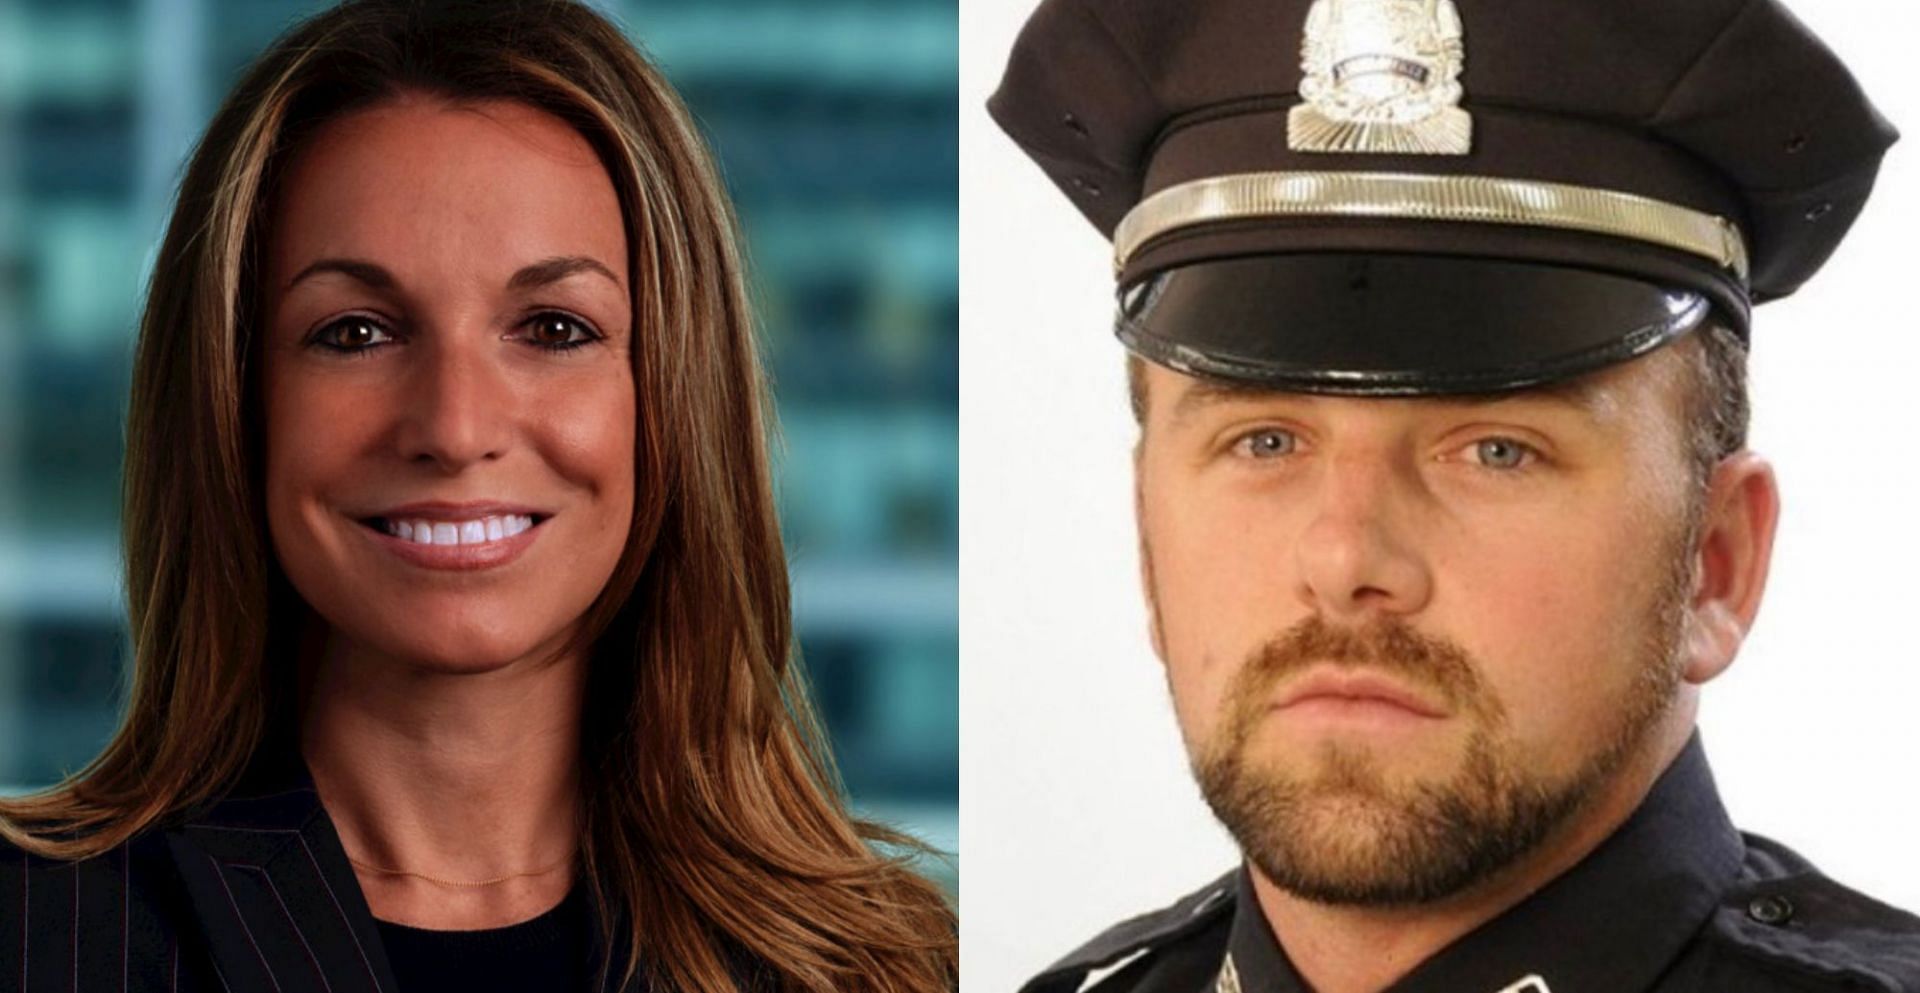 Karen Read has been charged for running over her boyfriend, Boston police officer John O&#039;Keefe (Image via Karen Read/LinkedIn and Boston Police Department)